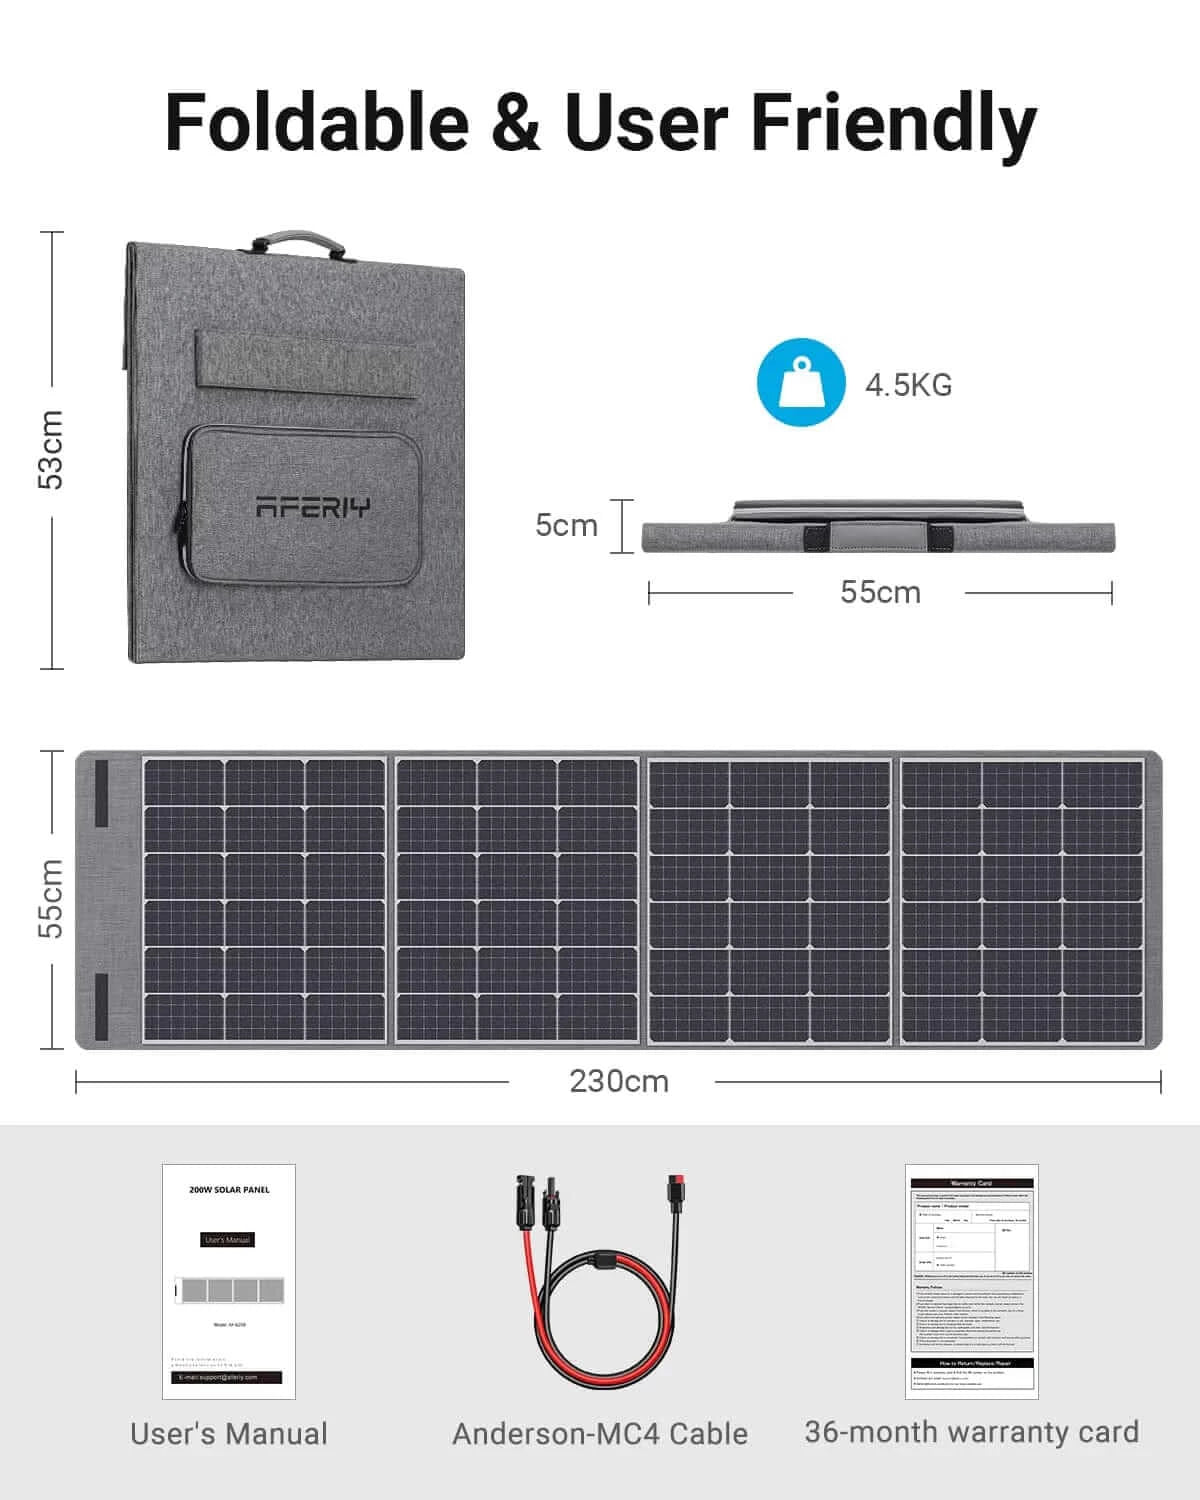 200 Watt Portable Solar Panel: AFERIY S200 - What's Included In The Box